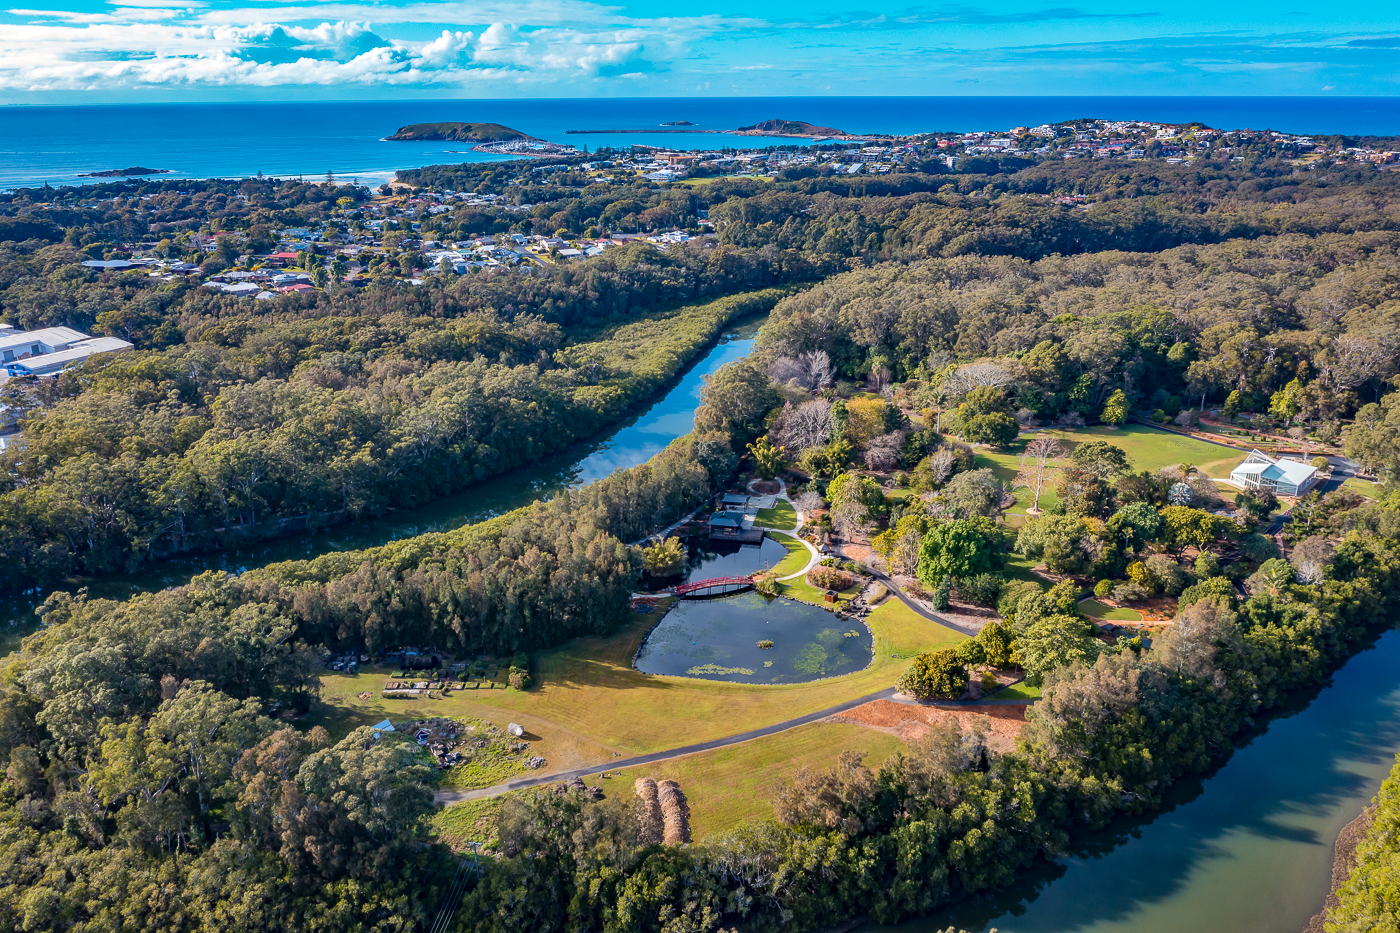 The Botanic Gardens Are The Green Heart Of Coffs Harbour